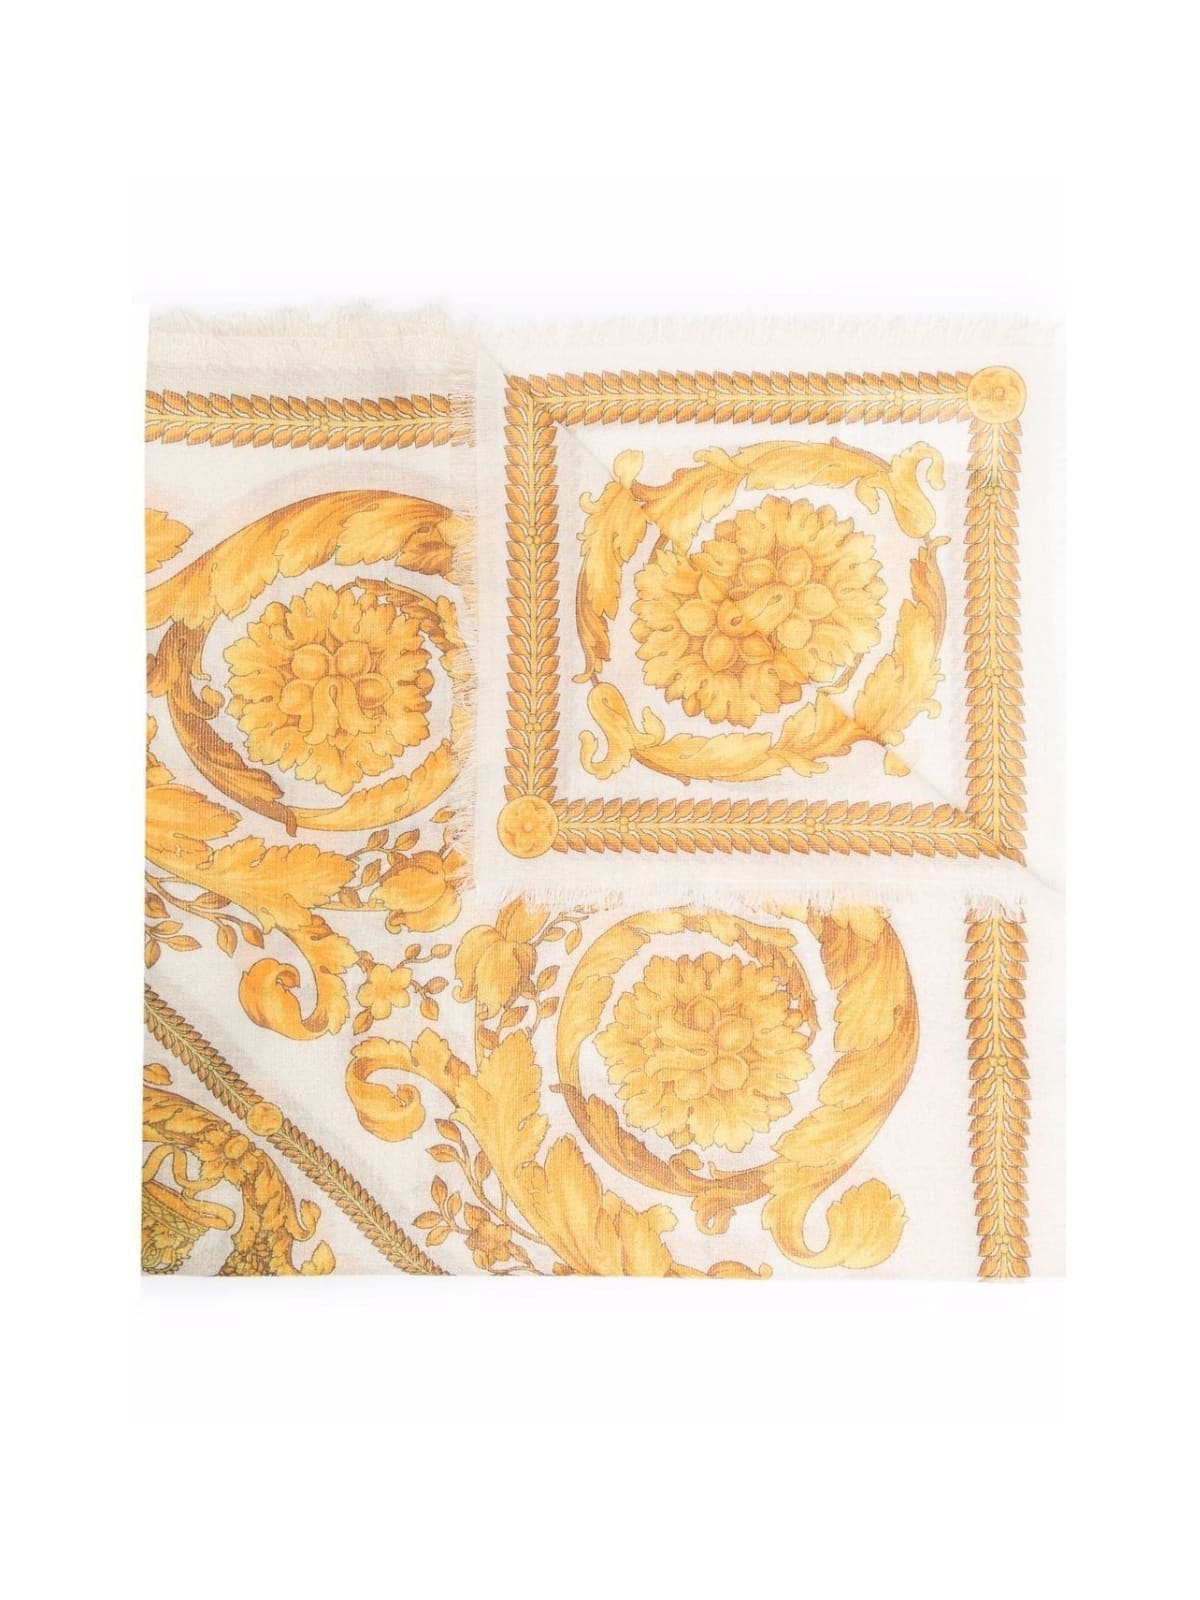 VERSACE BAROQUE PRINTING WHITE SCARF,1001599.1A01300 5W050 WHITE GOLD